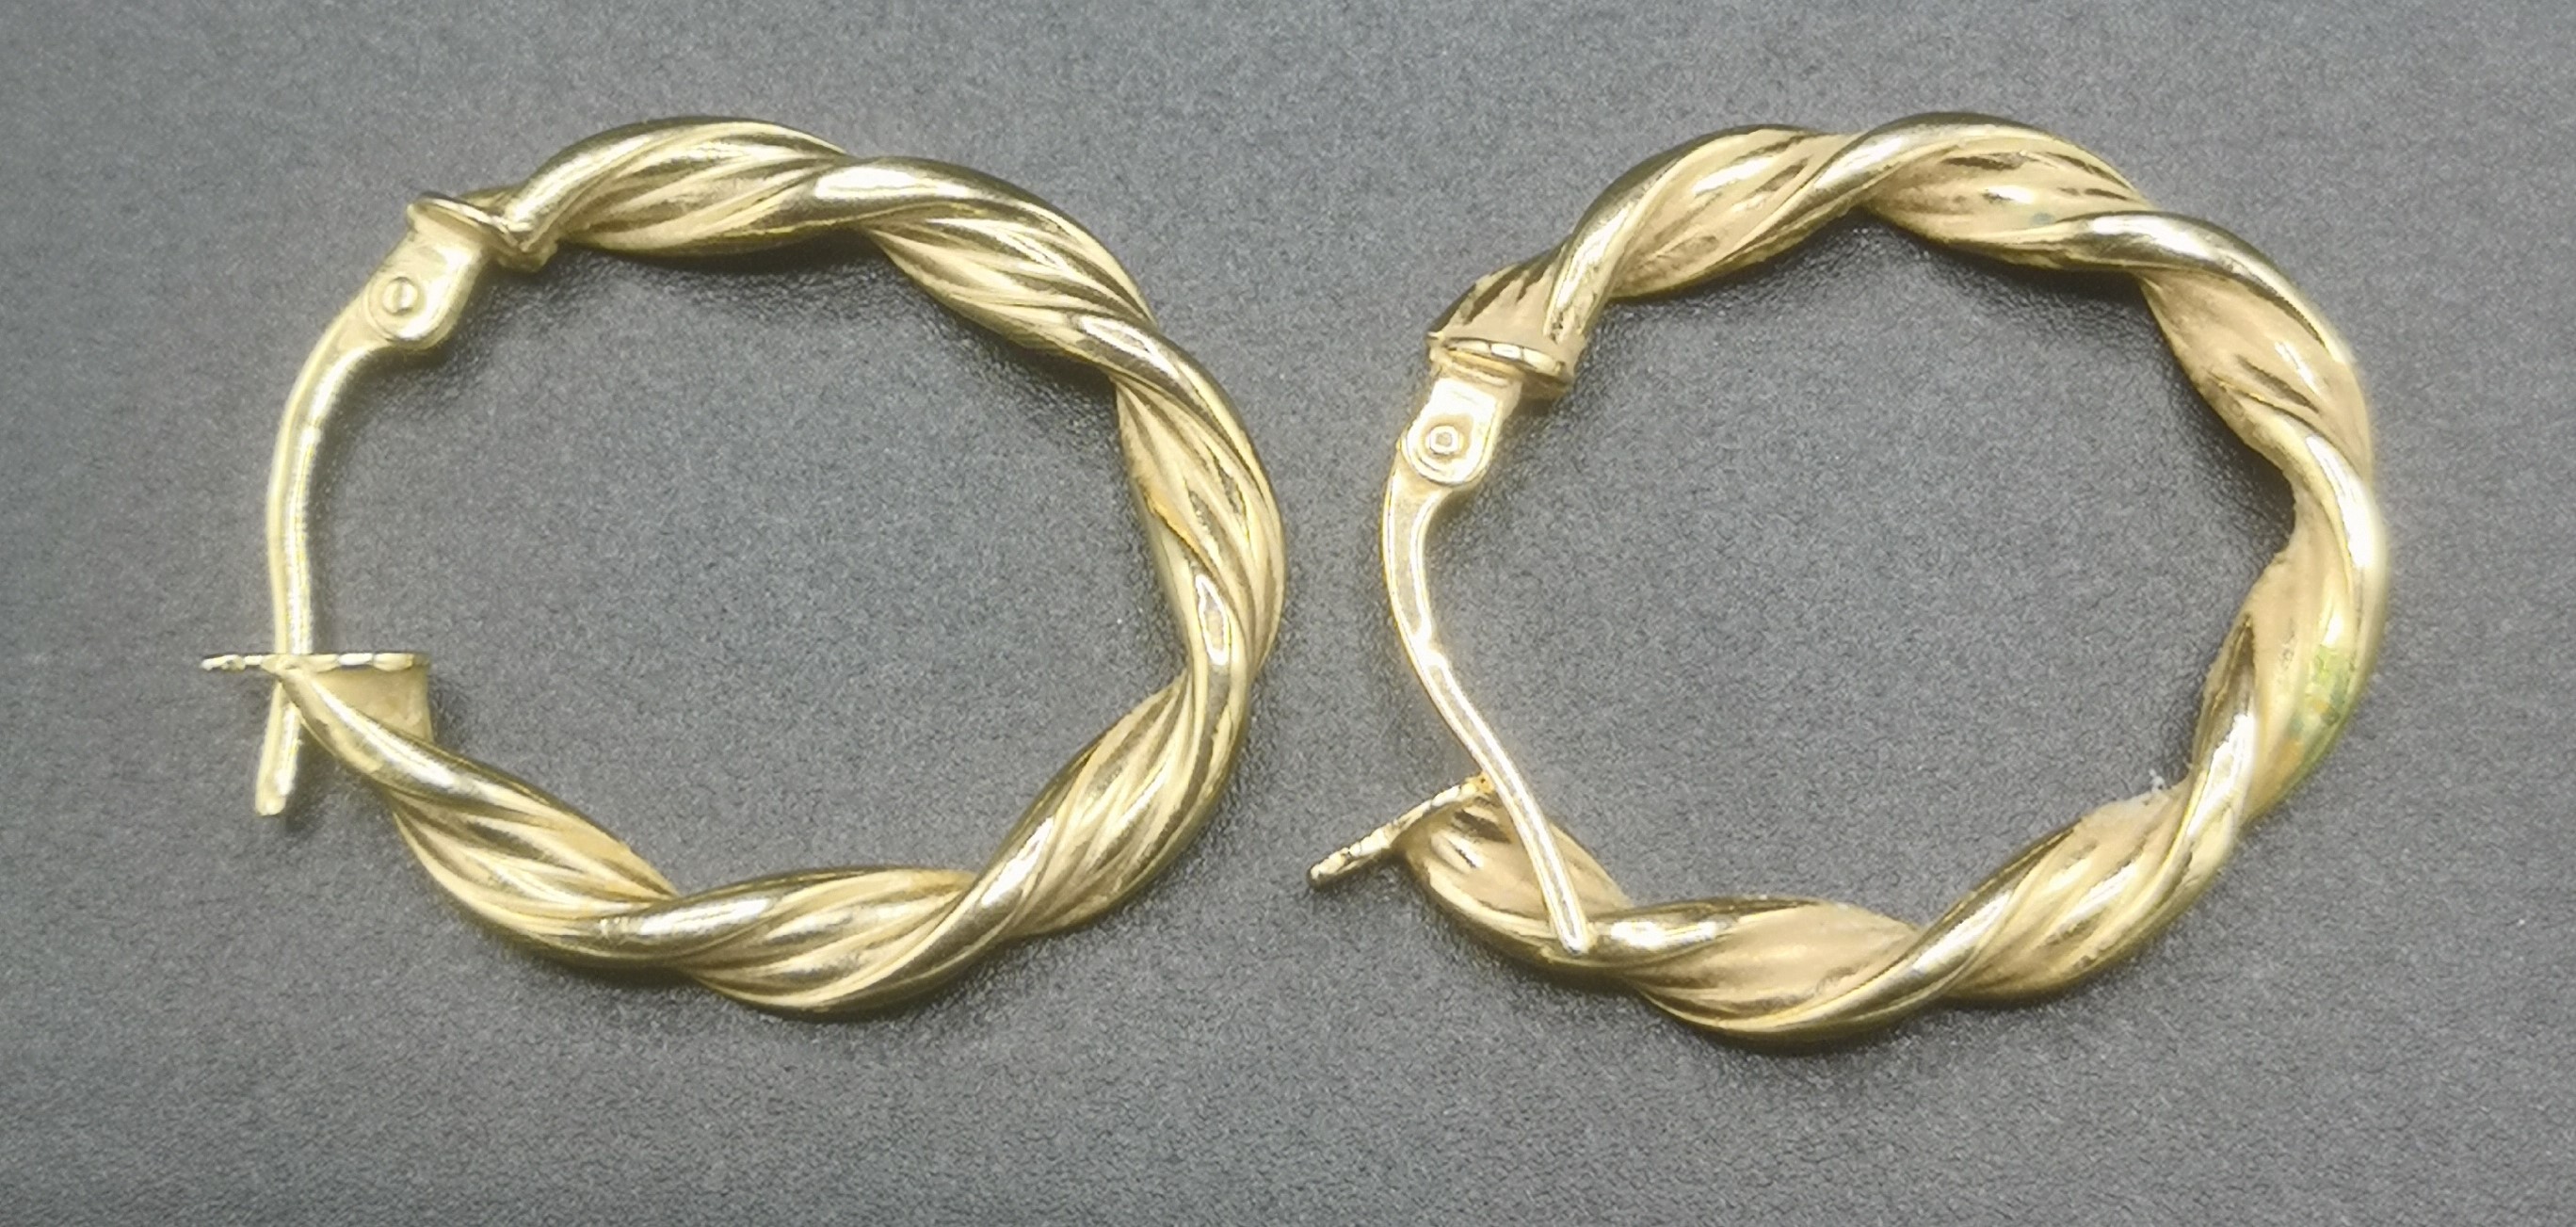 Pair of 9ct gold earrings - Image 4 of 4